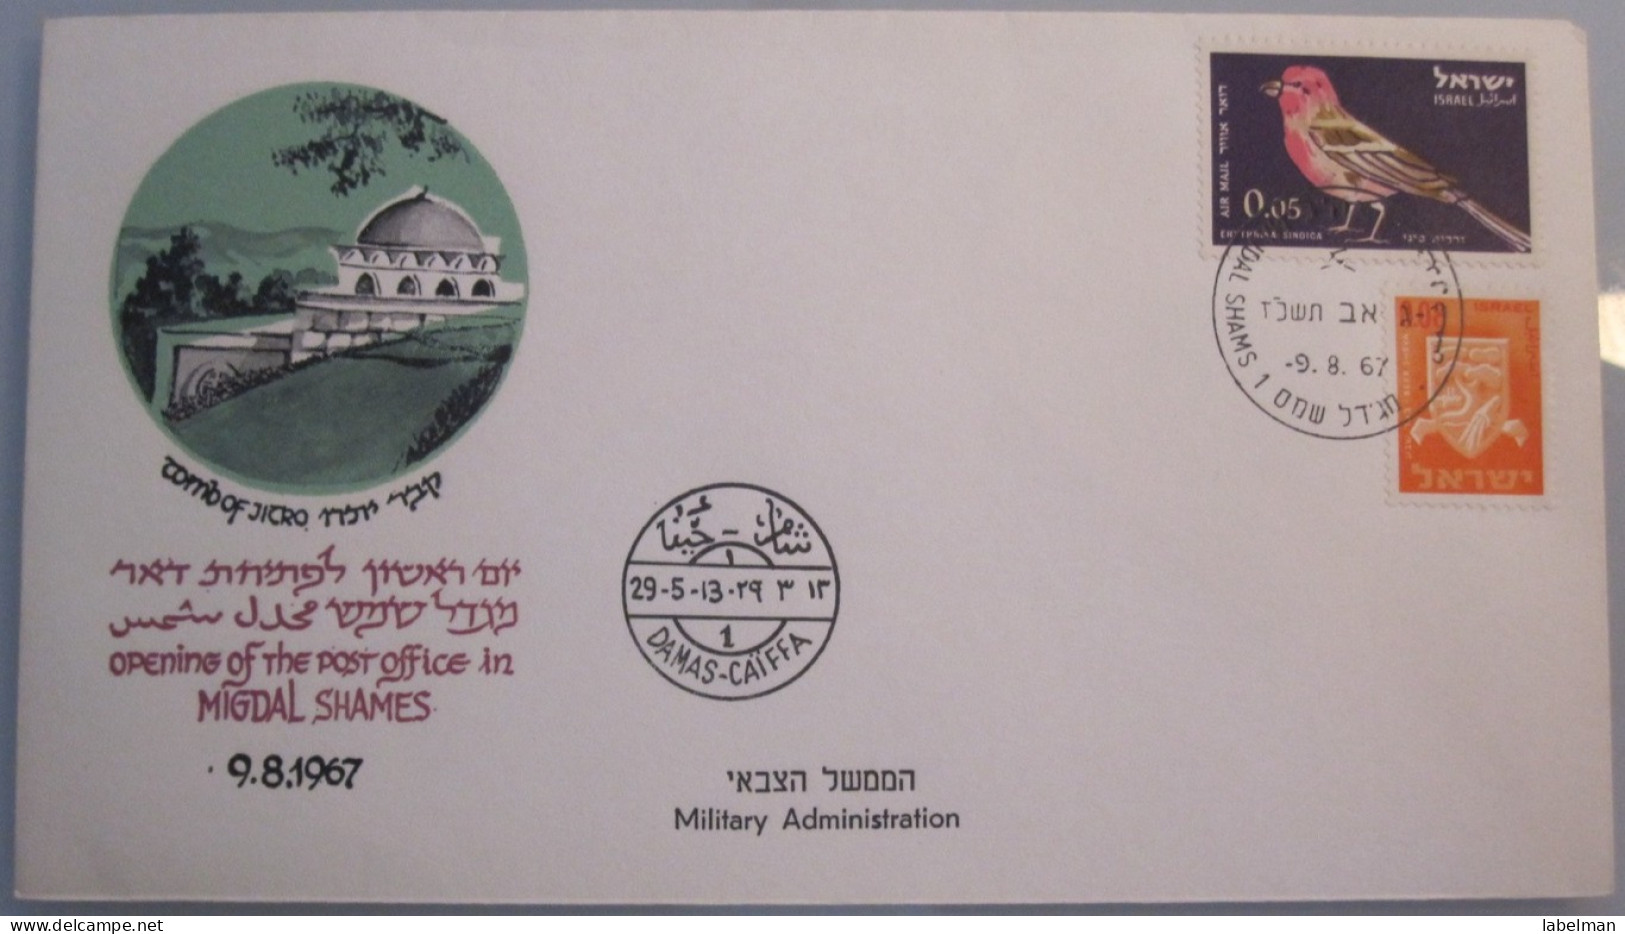 1967 POO FIRST DAY POST OFFICE OPENING MILITARY GOVERNMENT MIGDAL SHAMS SYRIA 6 DAYS WAR COVER ISRAEL CACHET - Covers & Documents